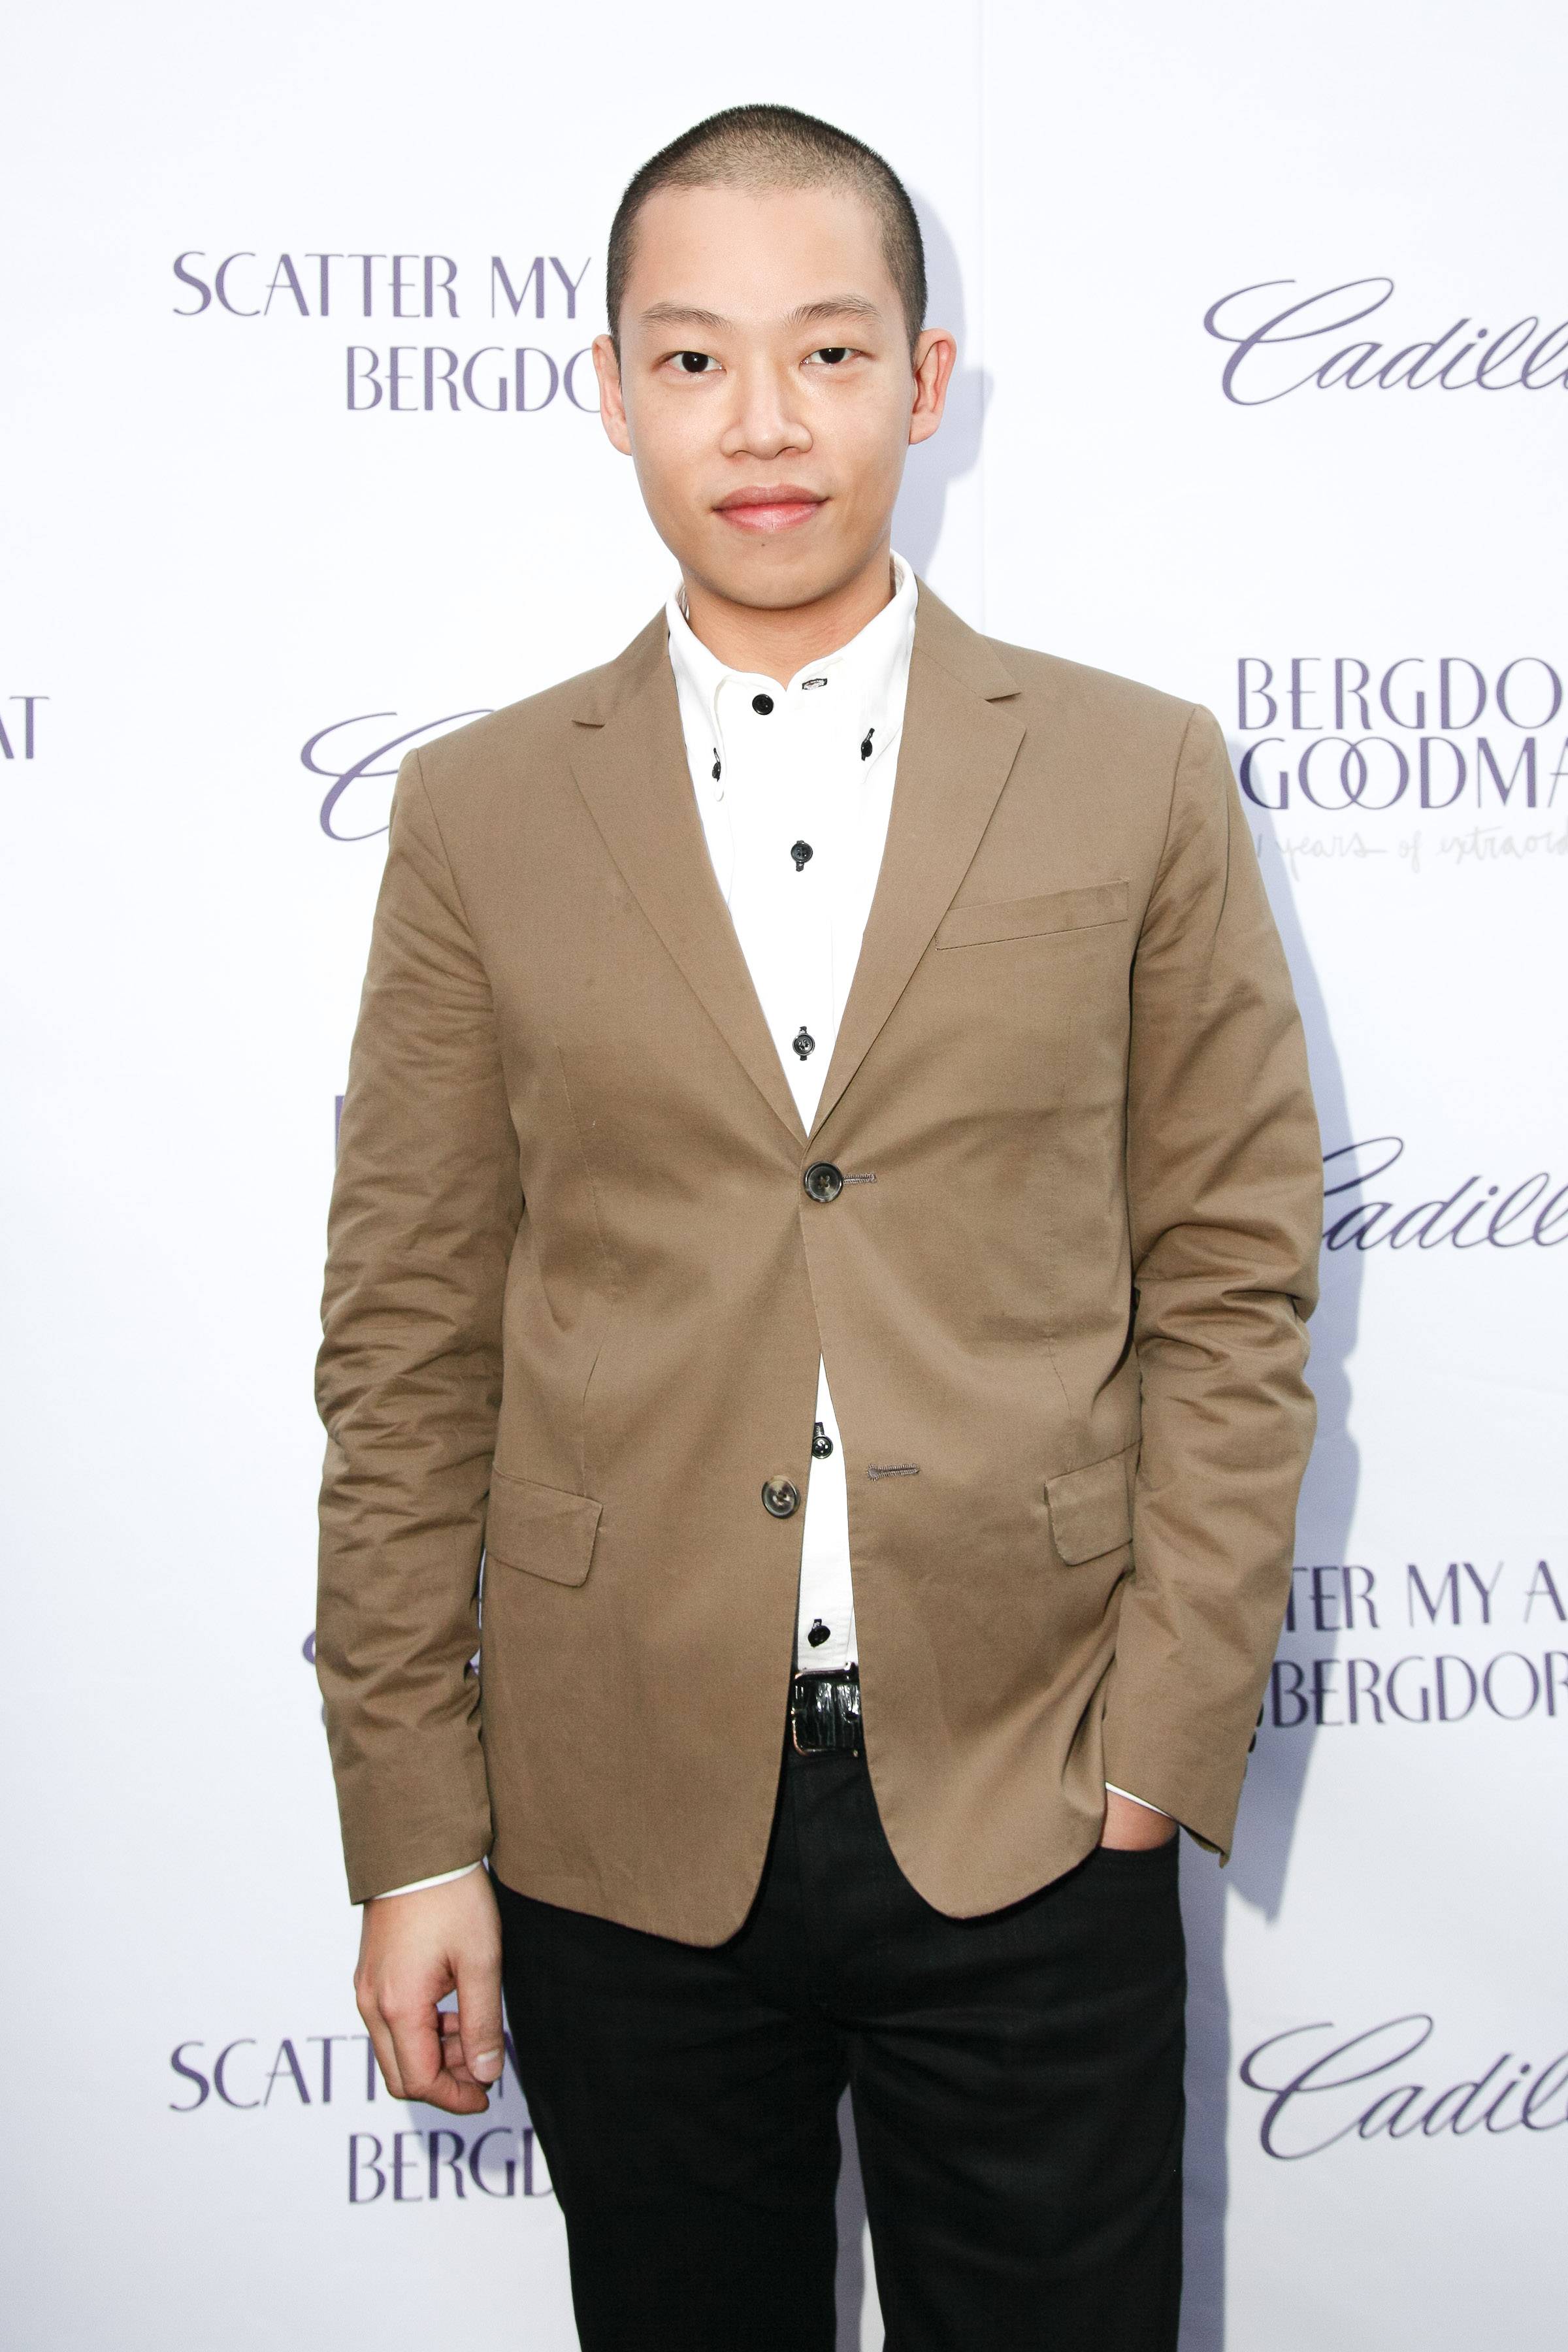 BERGDORF GOODMAN and CADILLAC host a special screening of 